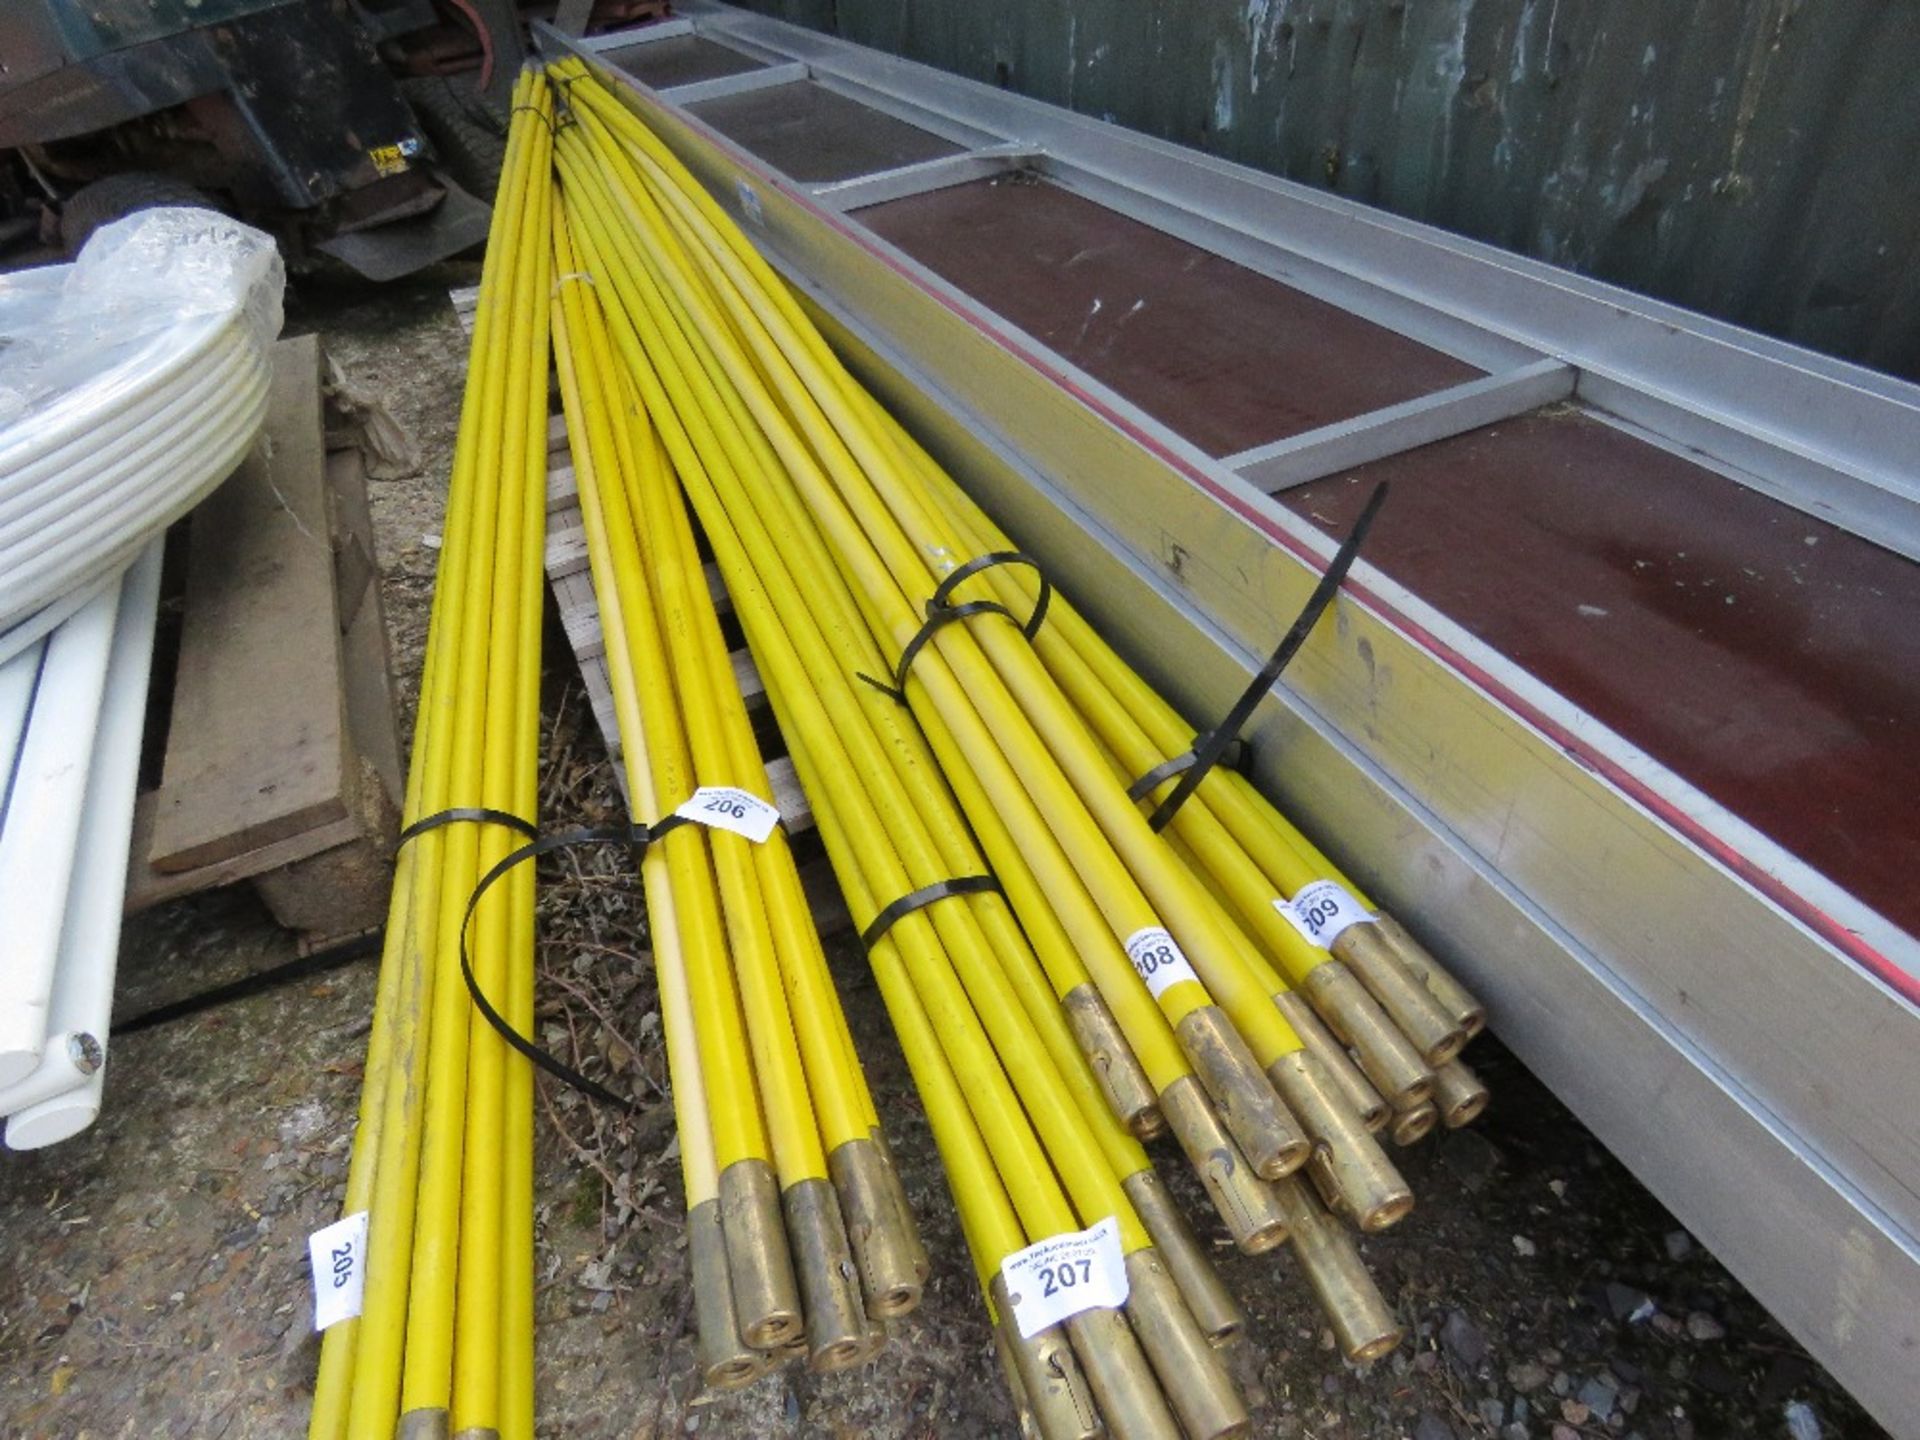 SET OF 10 X HEAVY DUTY DRAIN RODS. 10FT LENGTH APPROX.